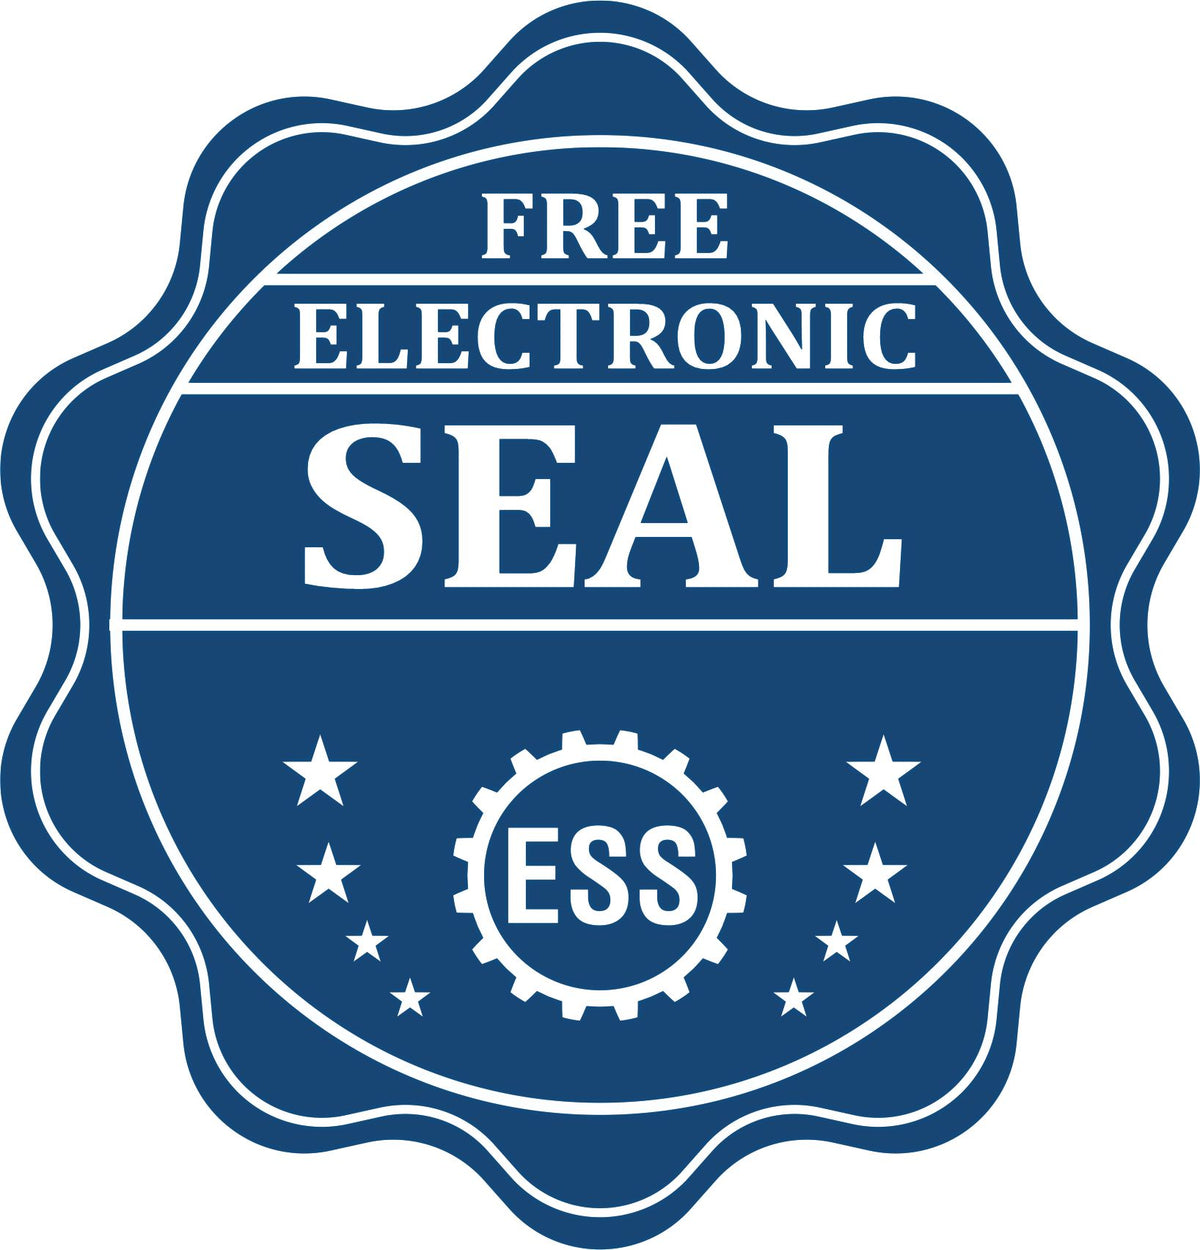 A badge showing a free electronic seal for the Slim Pre-Inked Illinois Landscape Architect Seal Stamp with stars and the ESS gear on the emblem.